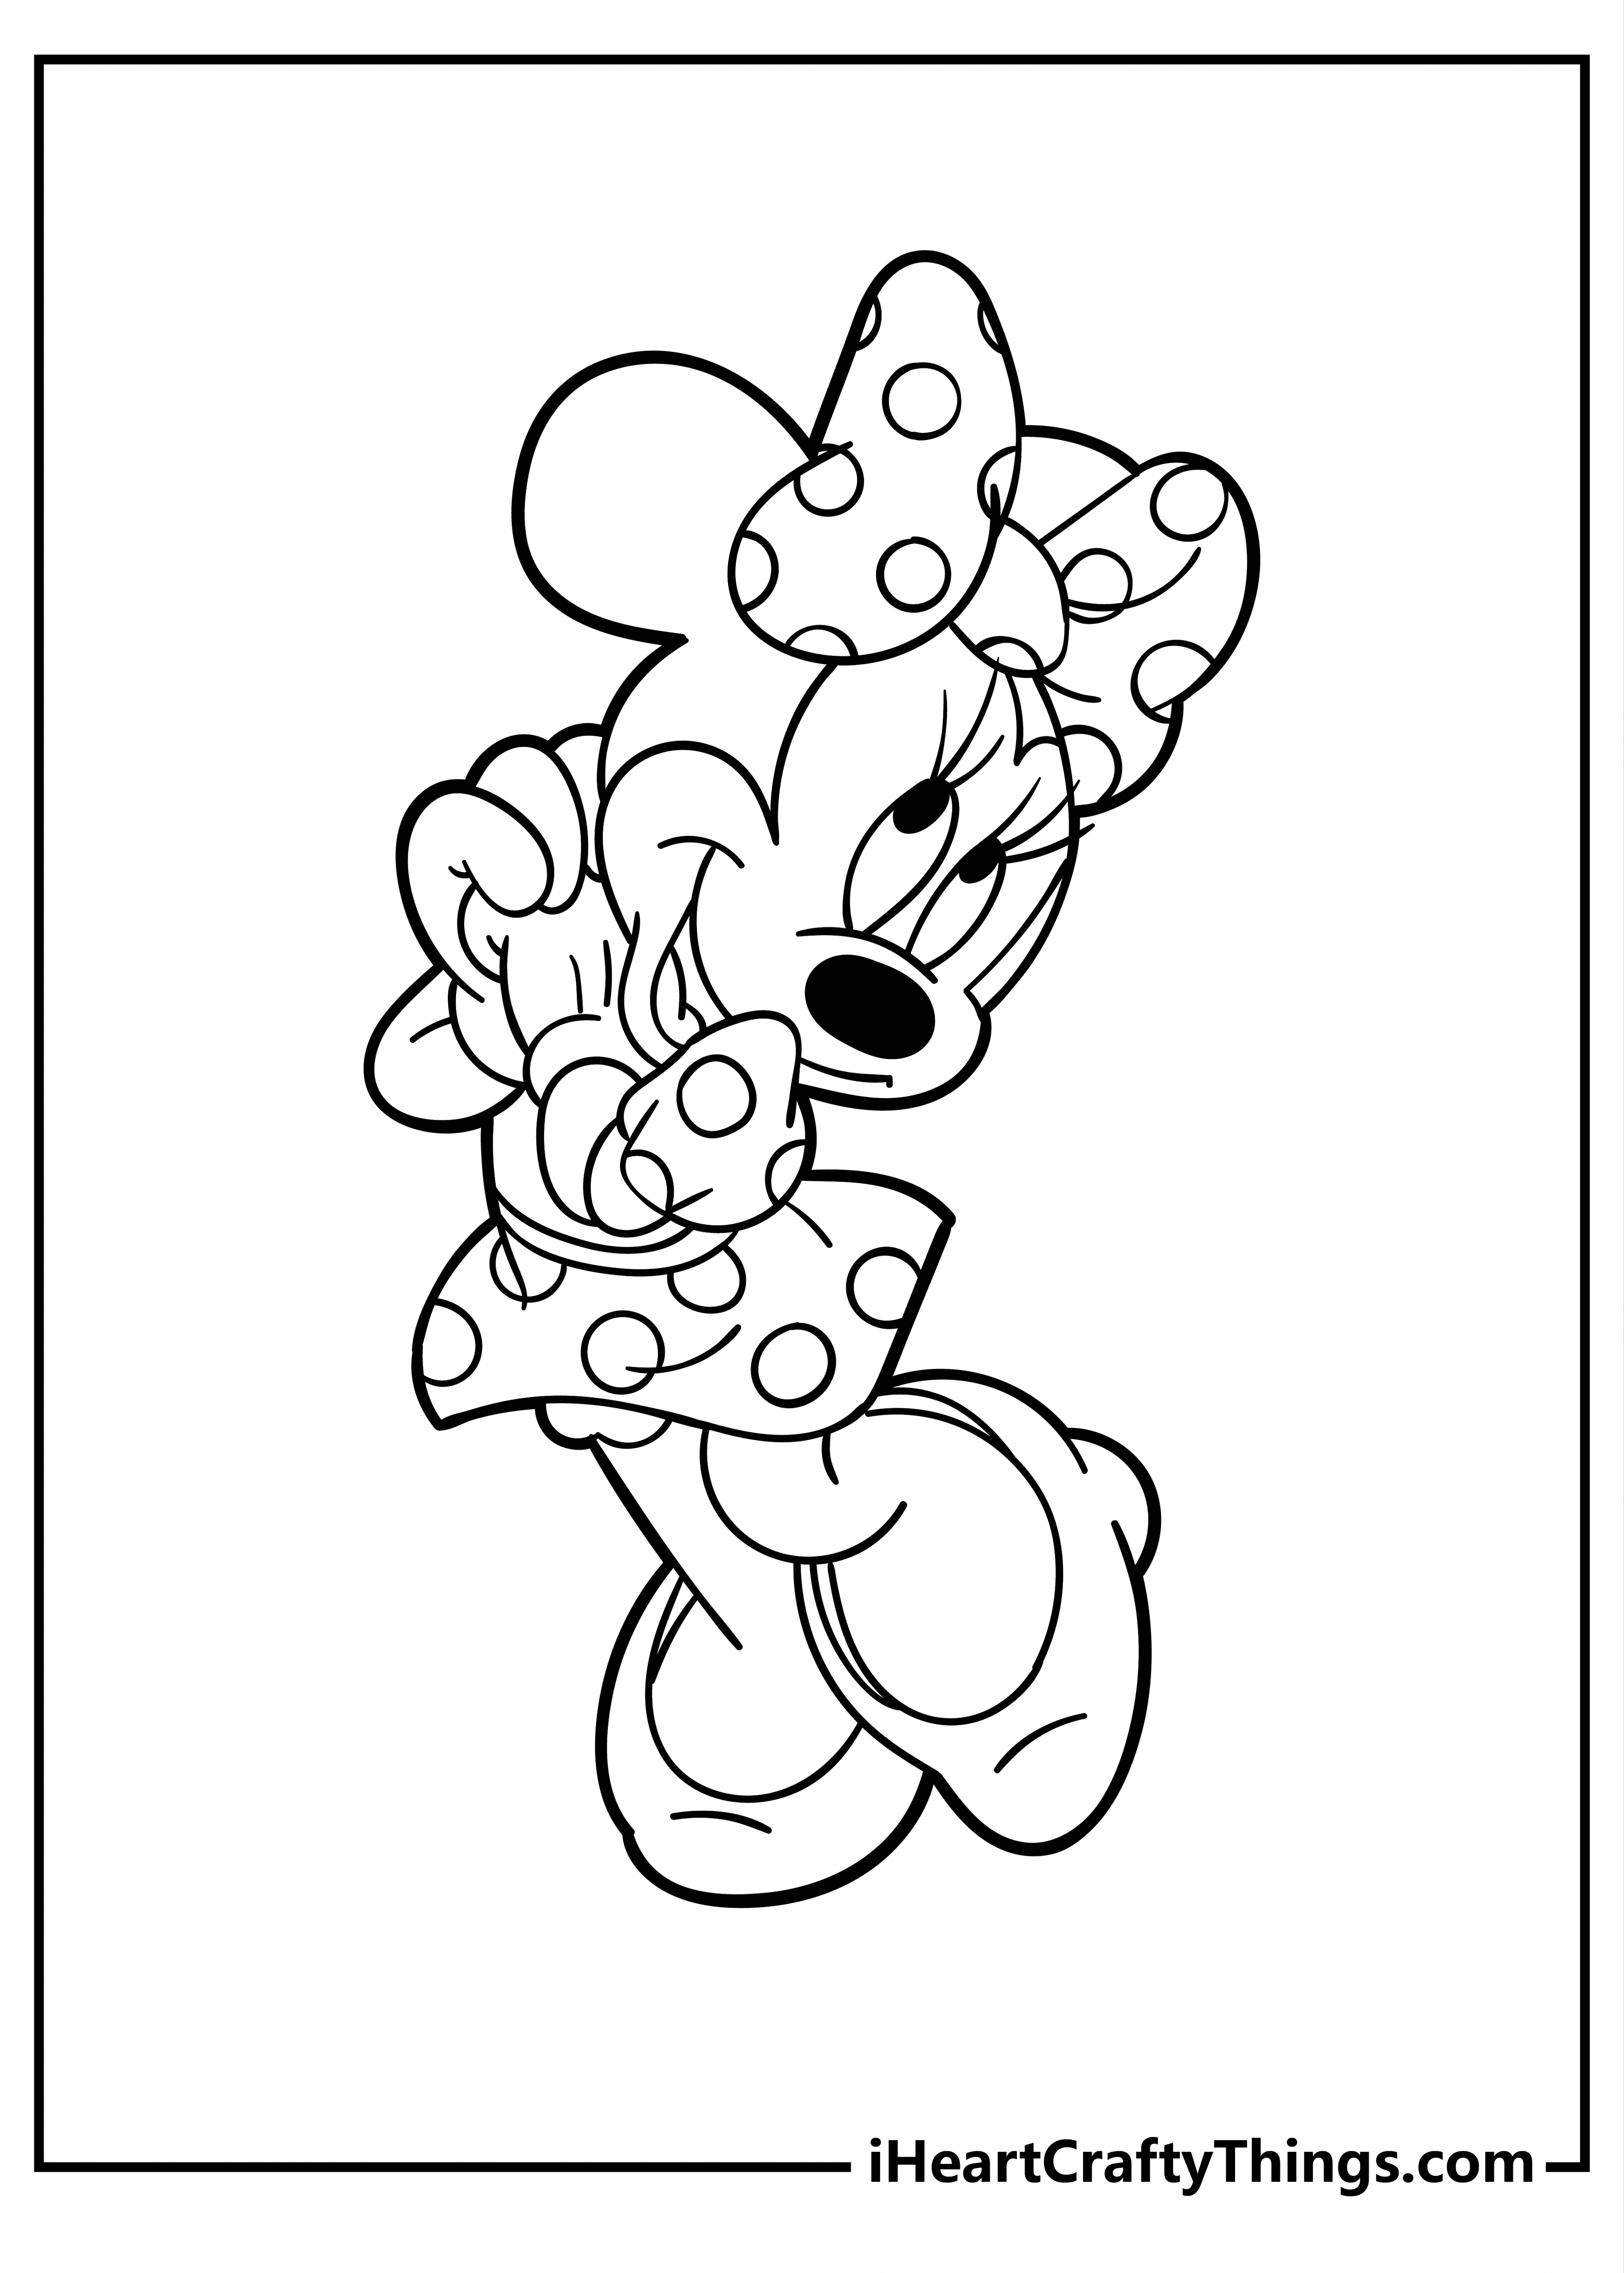 Printable Minnie Mouse Coloring Pages (Updated ) - FREE Printables - Free Printable Minnie Mouse